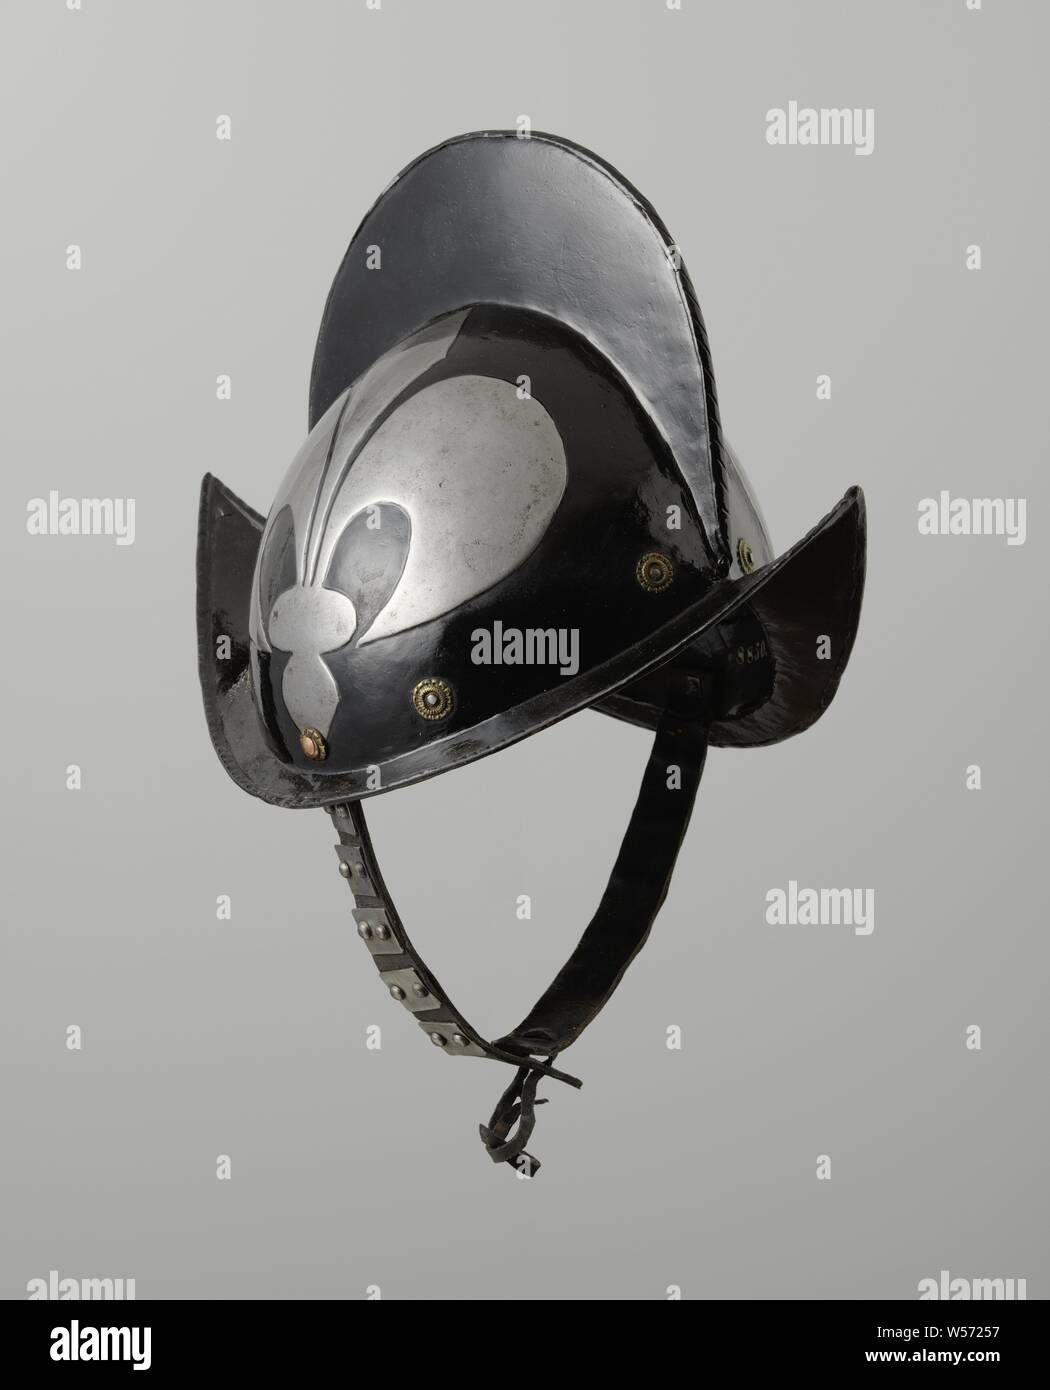 Morion helmet with extruded lily, Morion helmet, iron, blackened with white extruded lily, made from two halves. High helmet ball with high comb whose edge is cabled. Eight yellow copper rosettes surround the base of the helmet ball. The flap has high rising points on the front and back. The edge of the valve is flanged. On the left and right side on the helmet ball copper-colored rivets with which the chin strap is attached on the inside. The leather chin strap consists of two leather straps whose ends are attached to each other. Each strap has five metal plates to which two rivets are Stock Photo